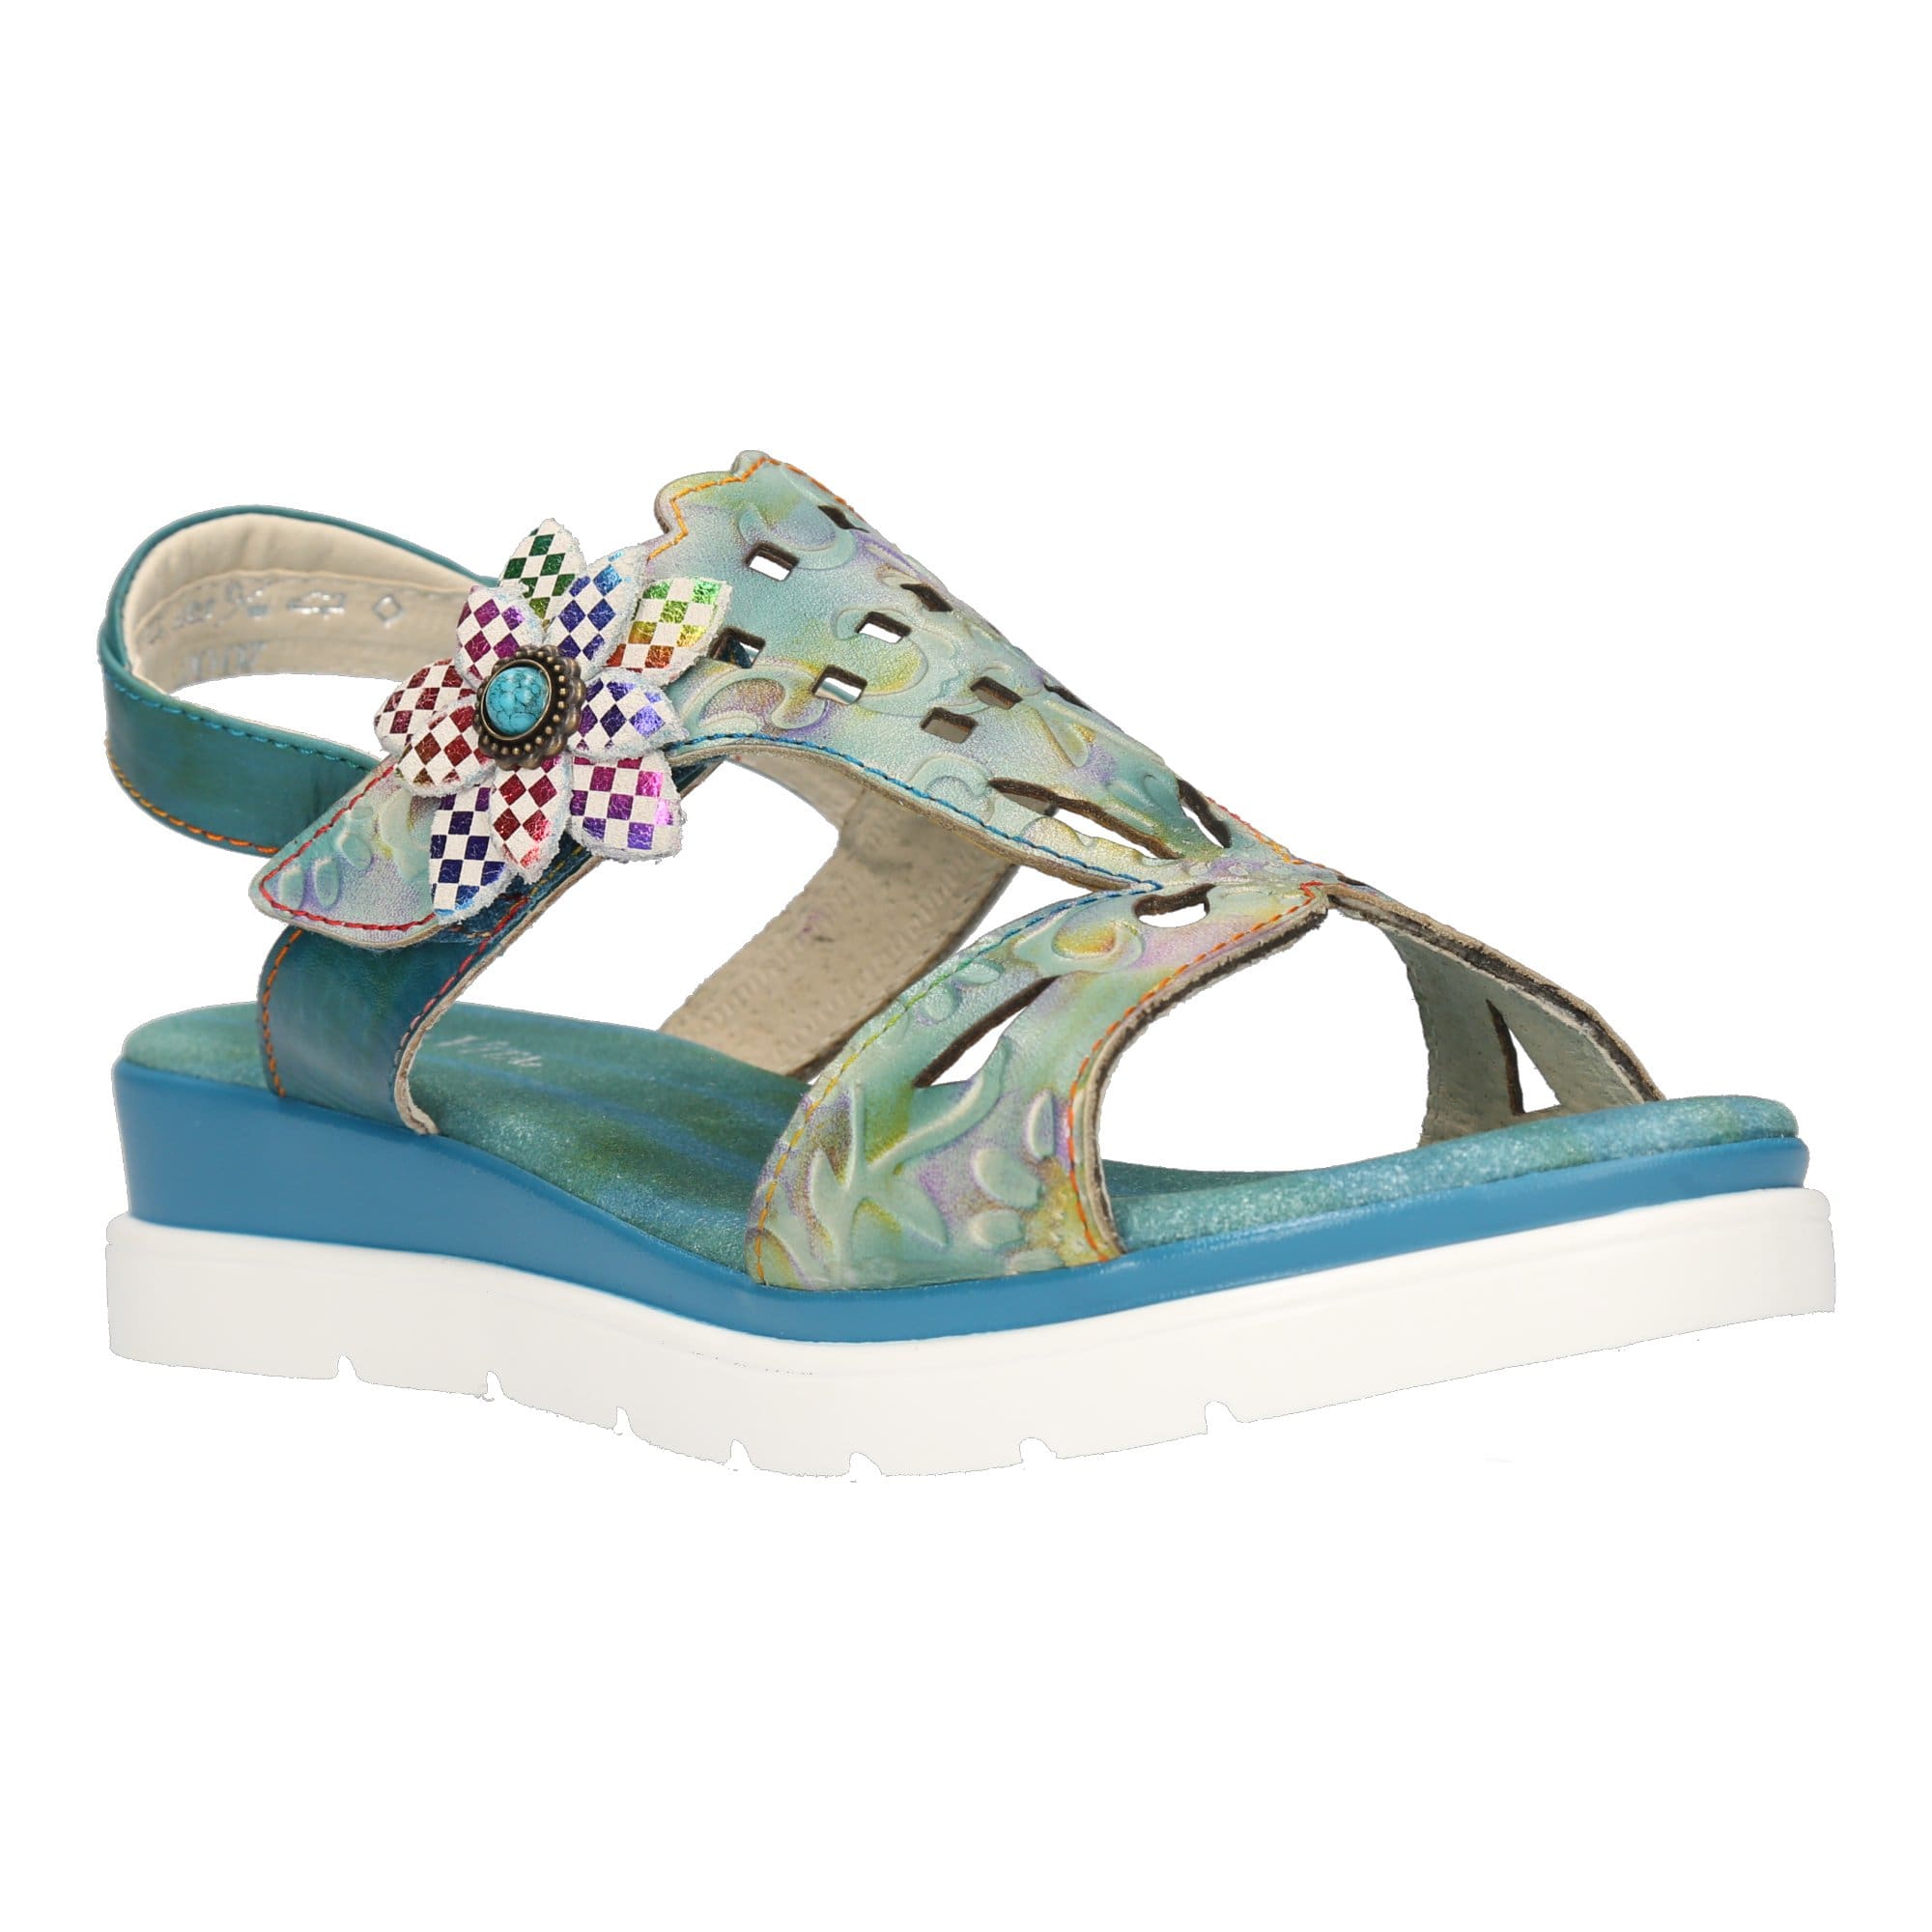 Chaussures JACCEEO 04 - Sandale